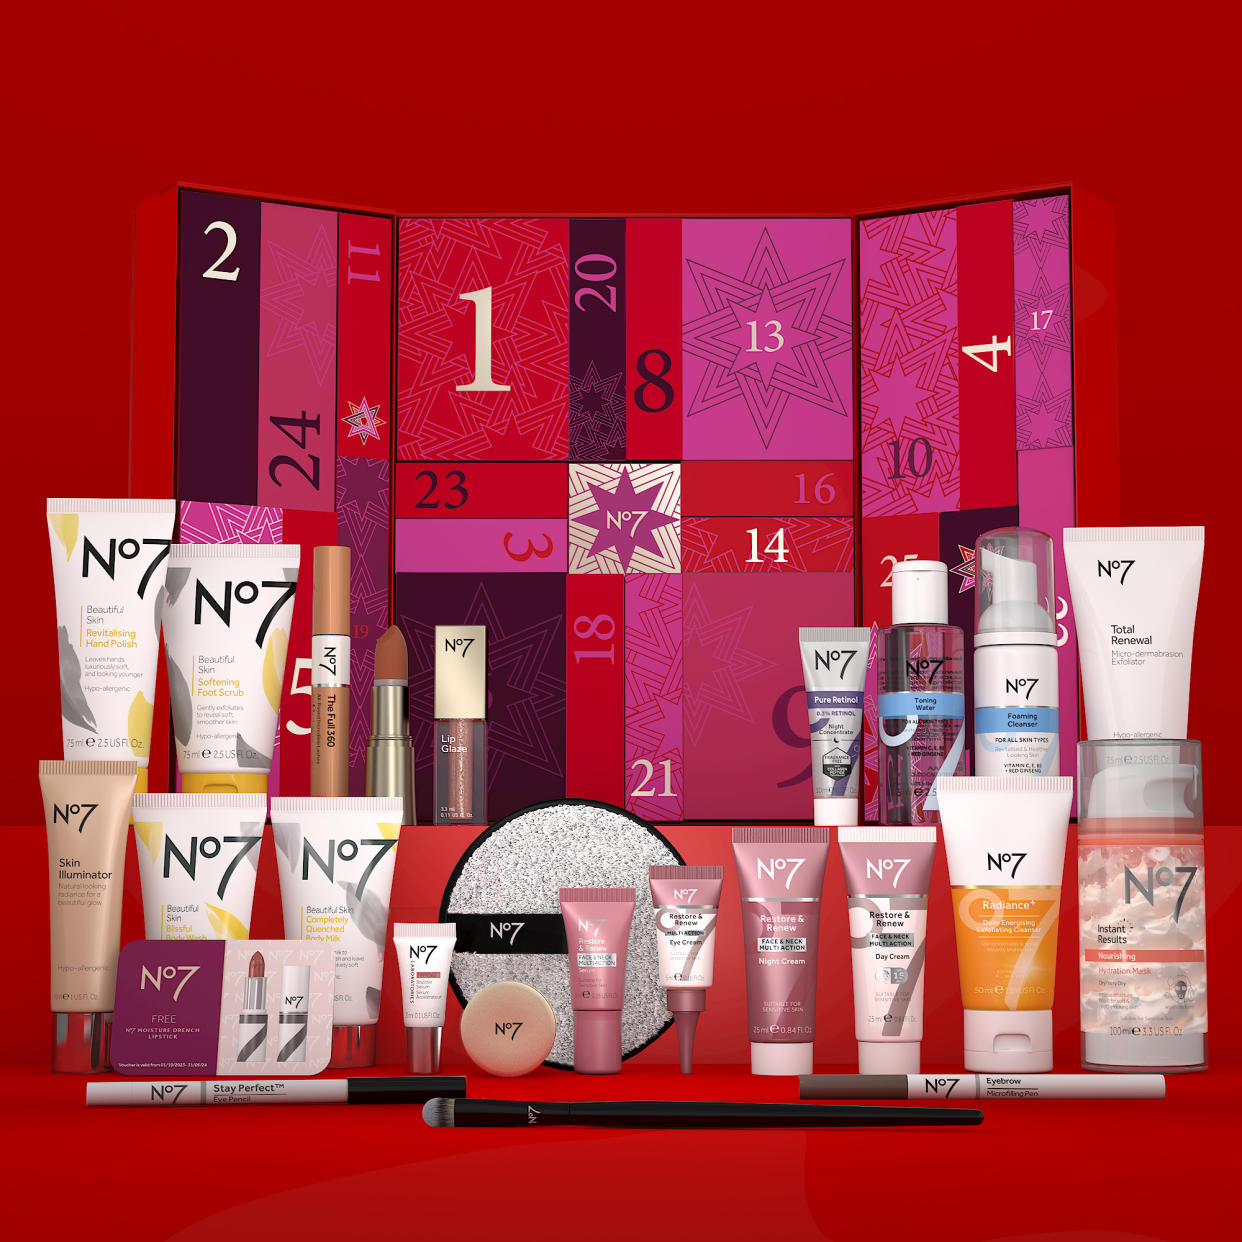 Bag your favourites from No7's Restore & Renew collection for a fraction of the price. (No7 / Boots)